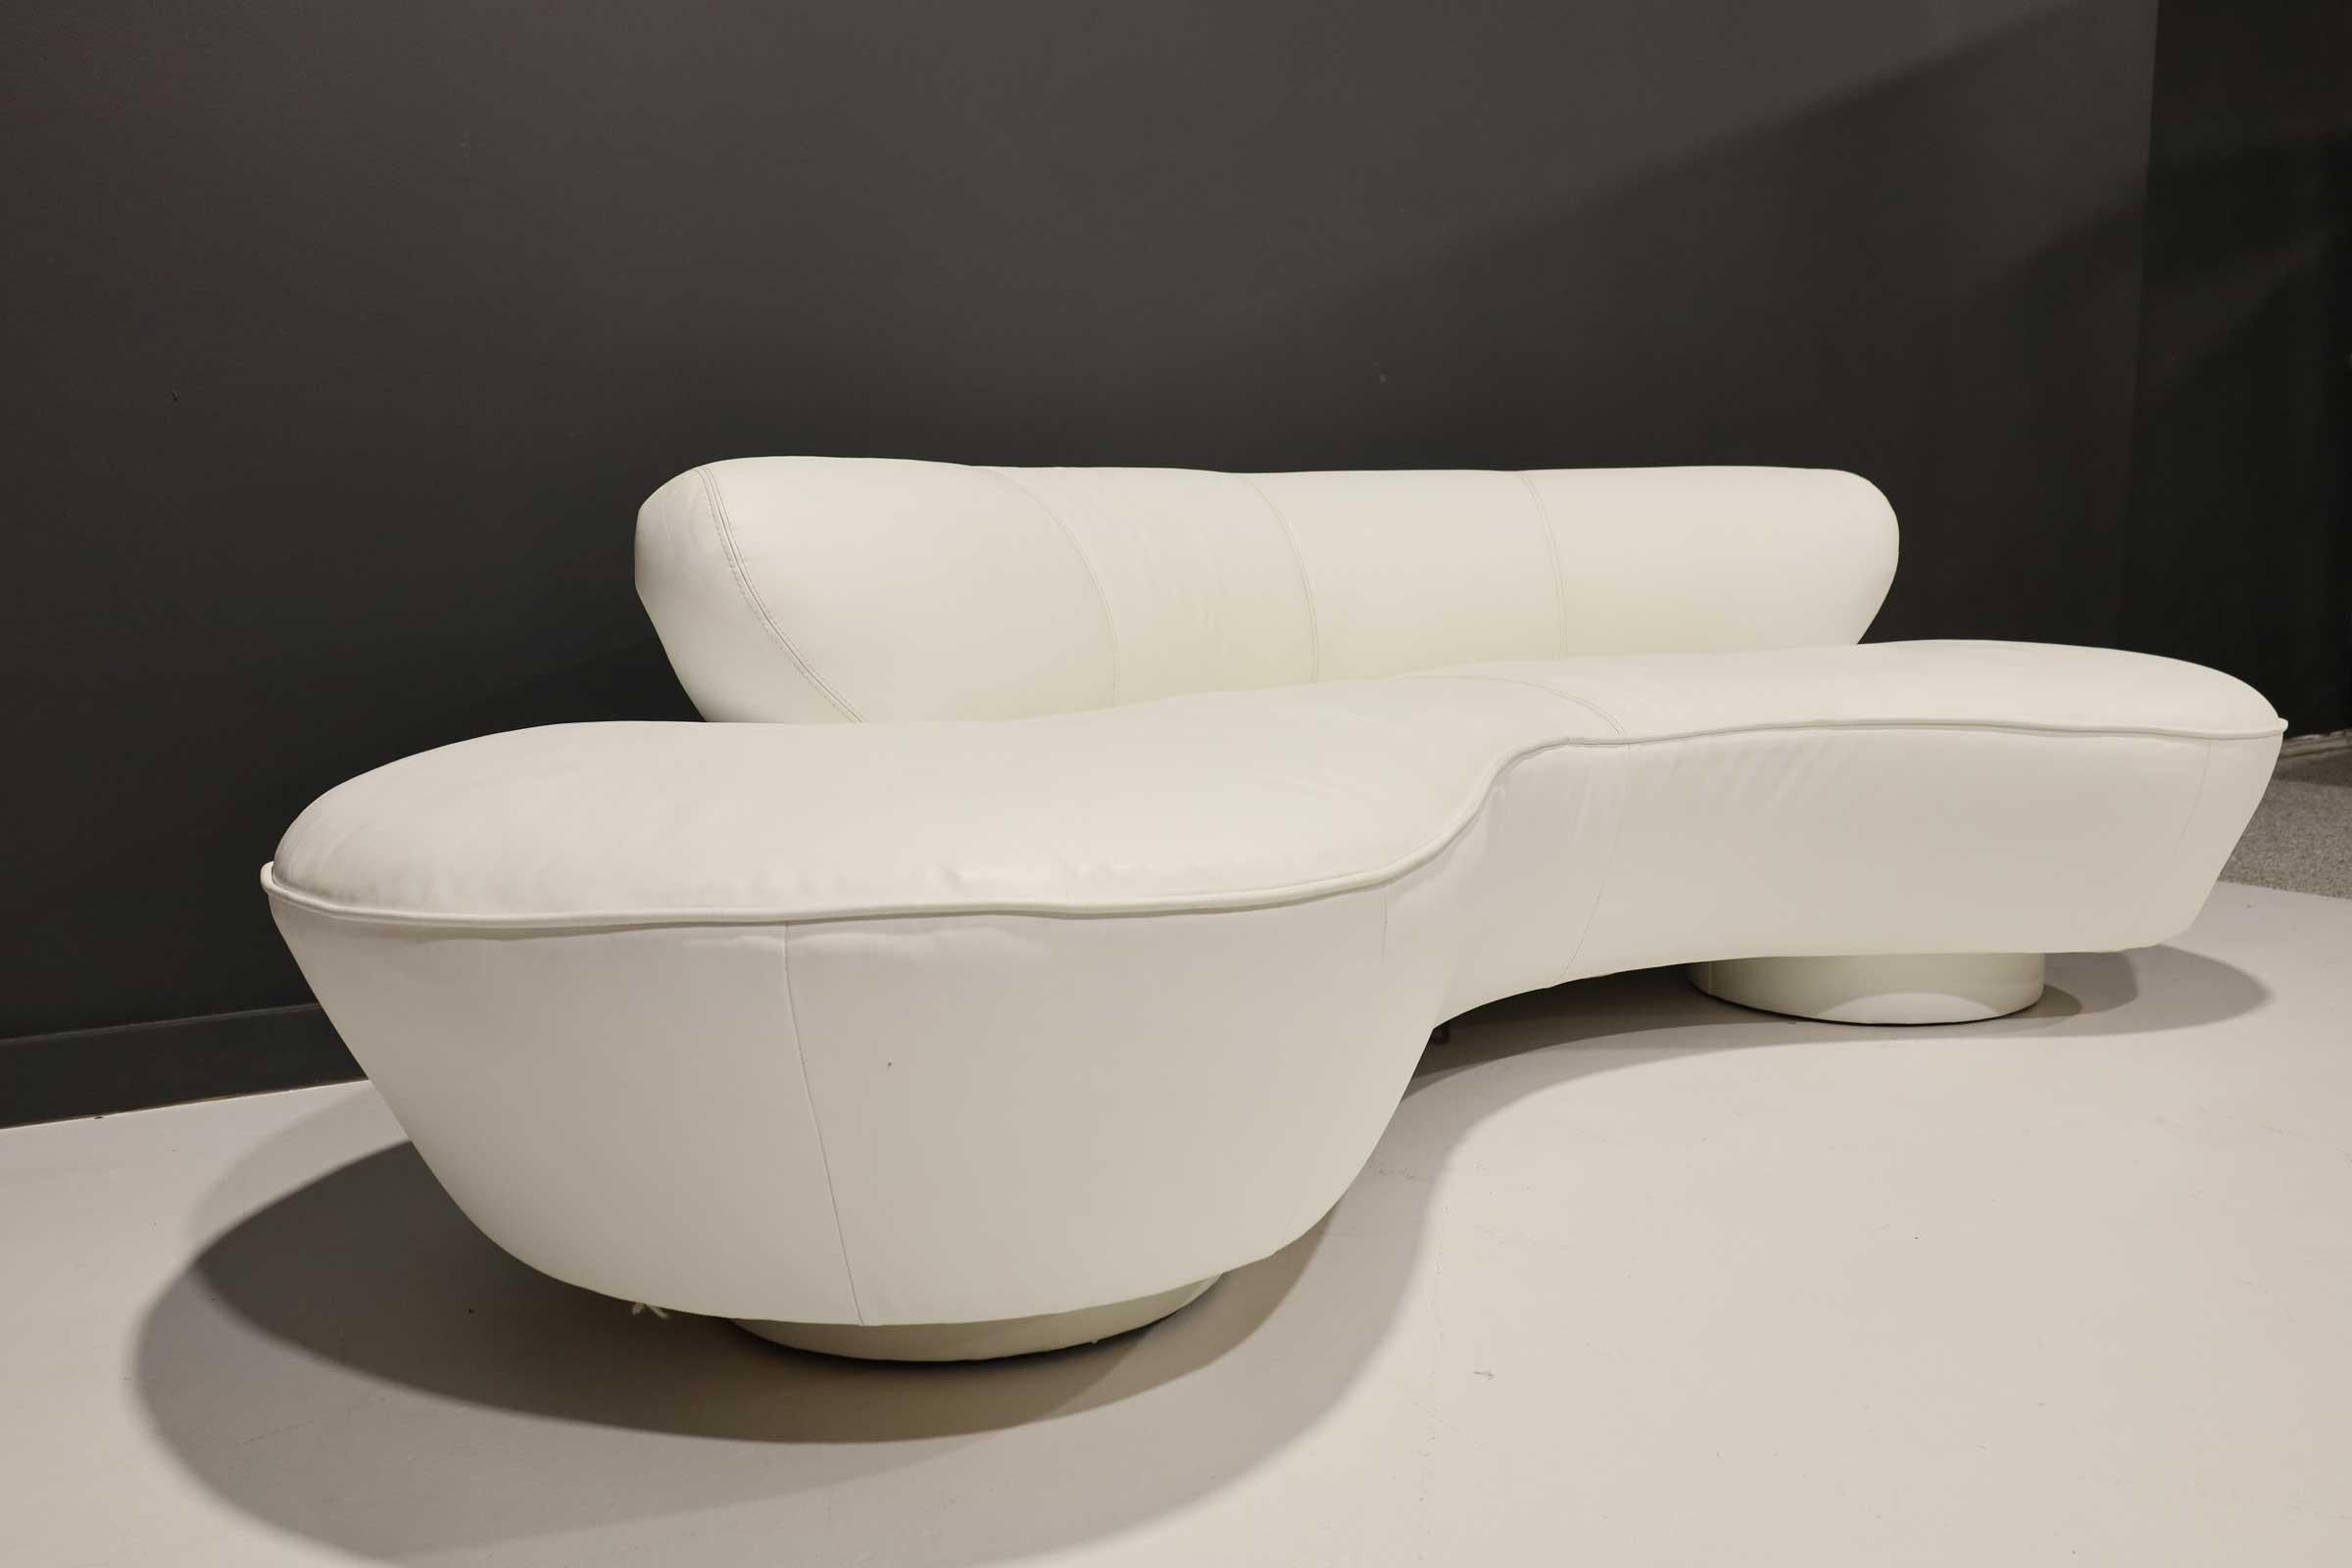 North American Vladimir Kagan Cloud Serpentine Sofa by Directional in White Leather